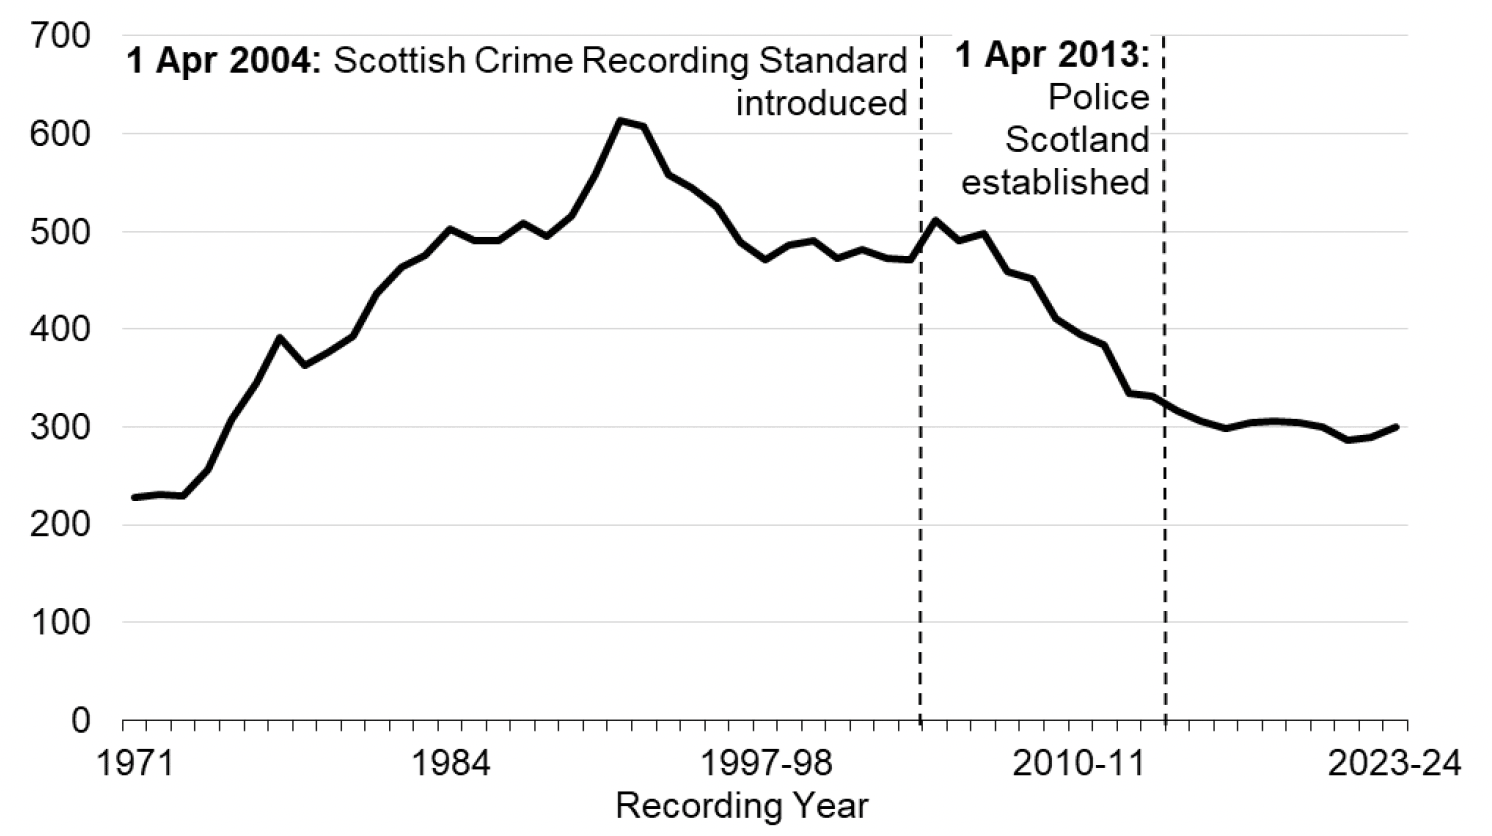 A line chart showing that total crimes recorded generally increased between 1971 and 1991 when it peaked but then generally decreased between 1991 and 2023-24. The lowest recorded level was in 1971.